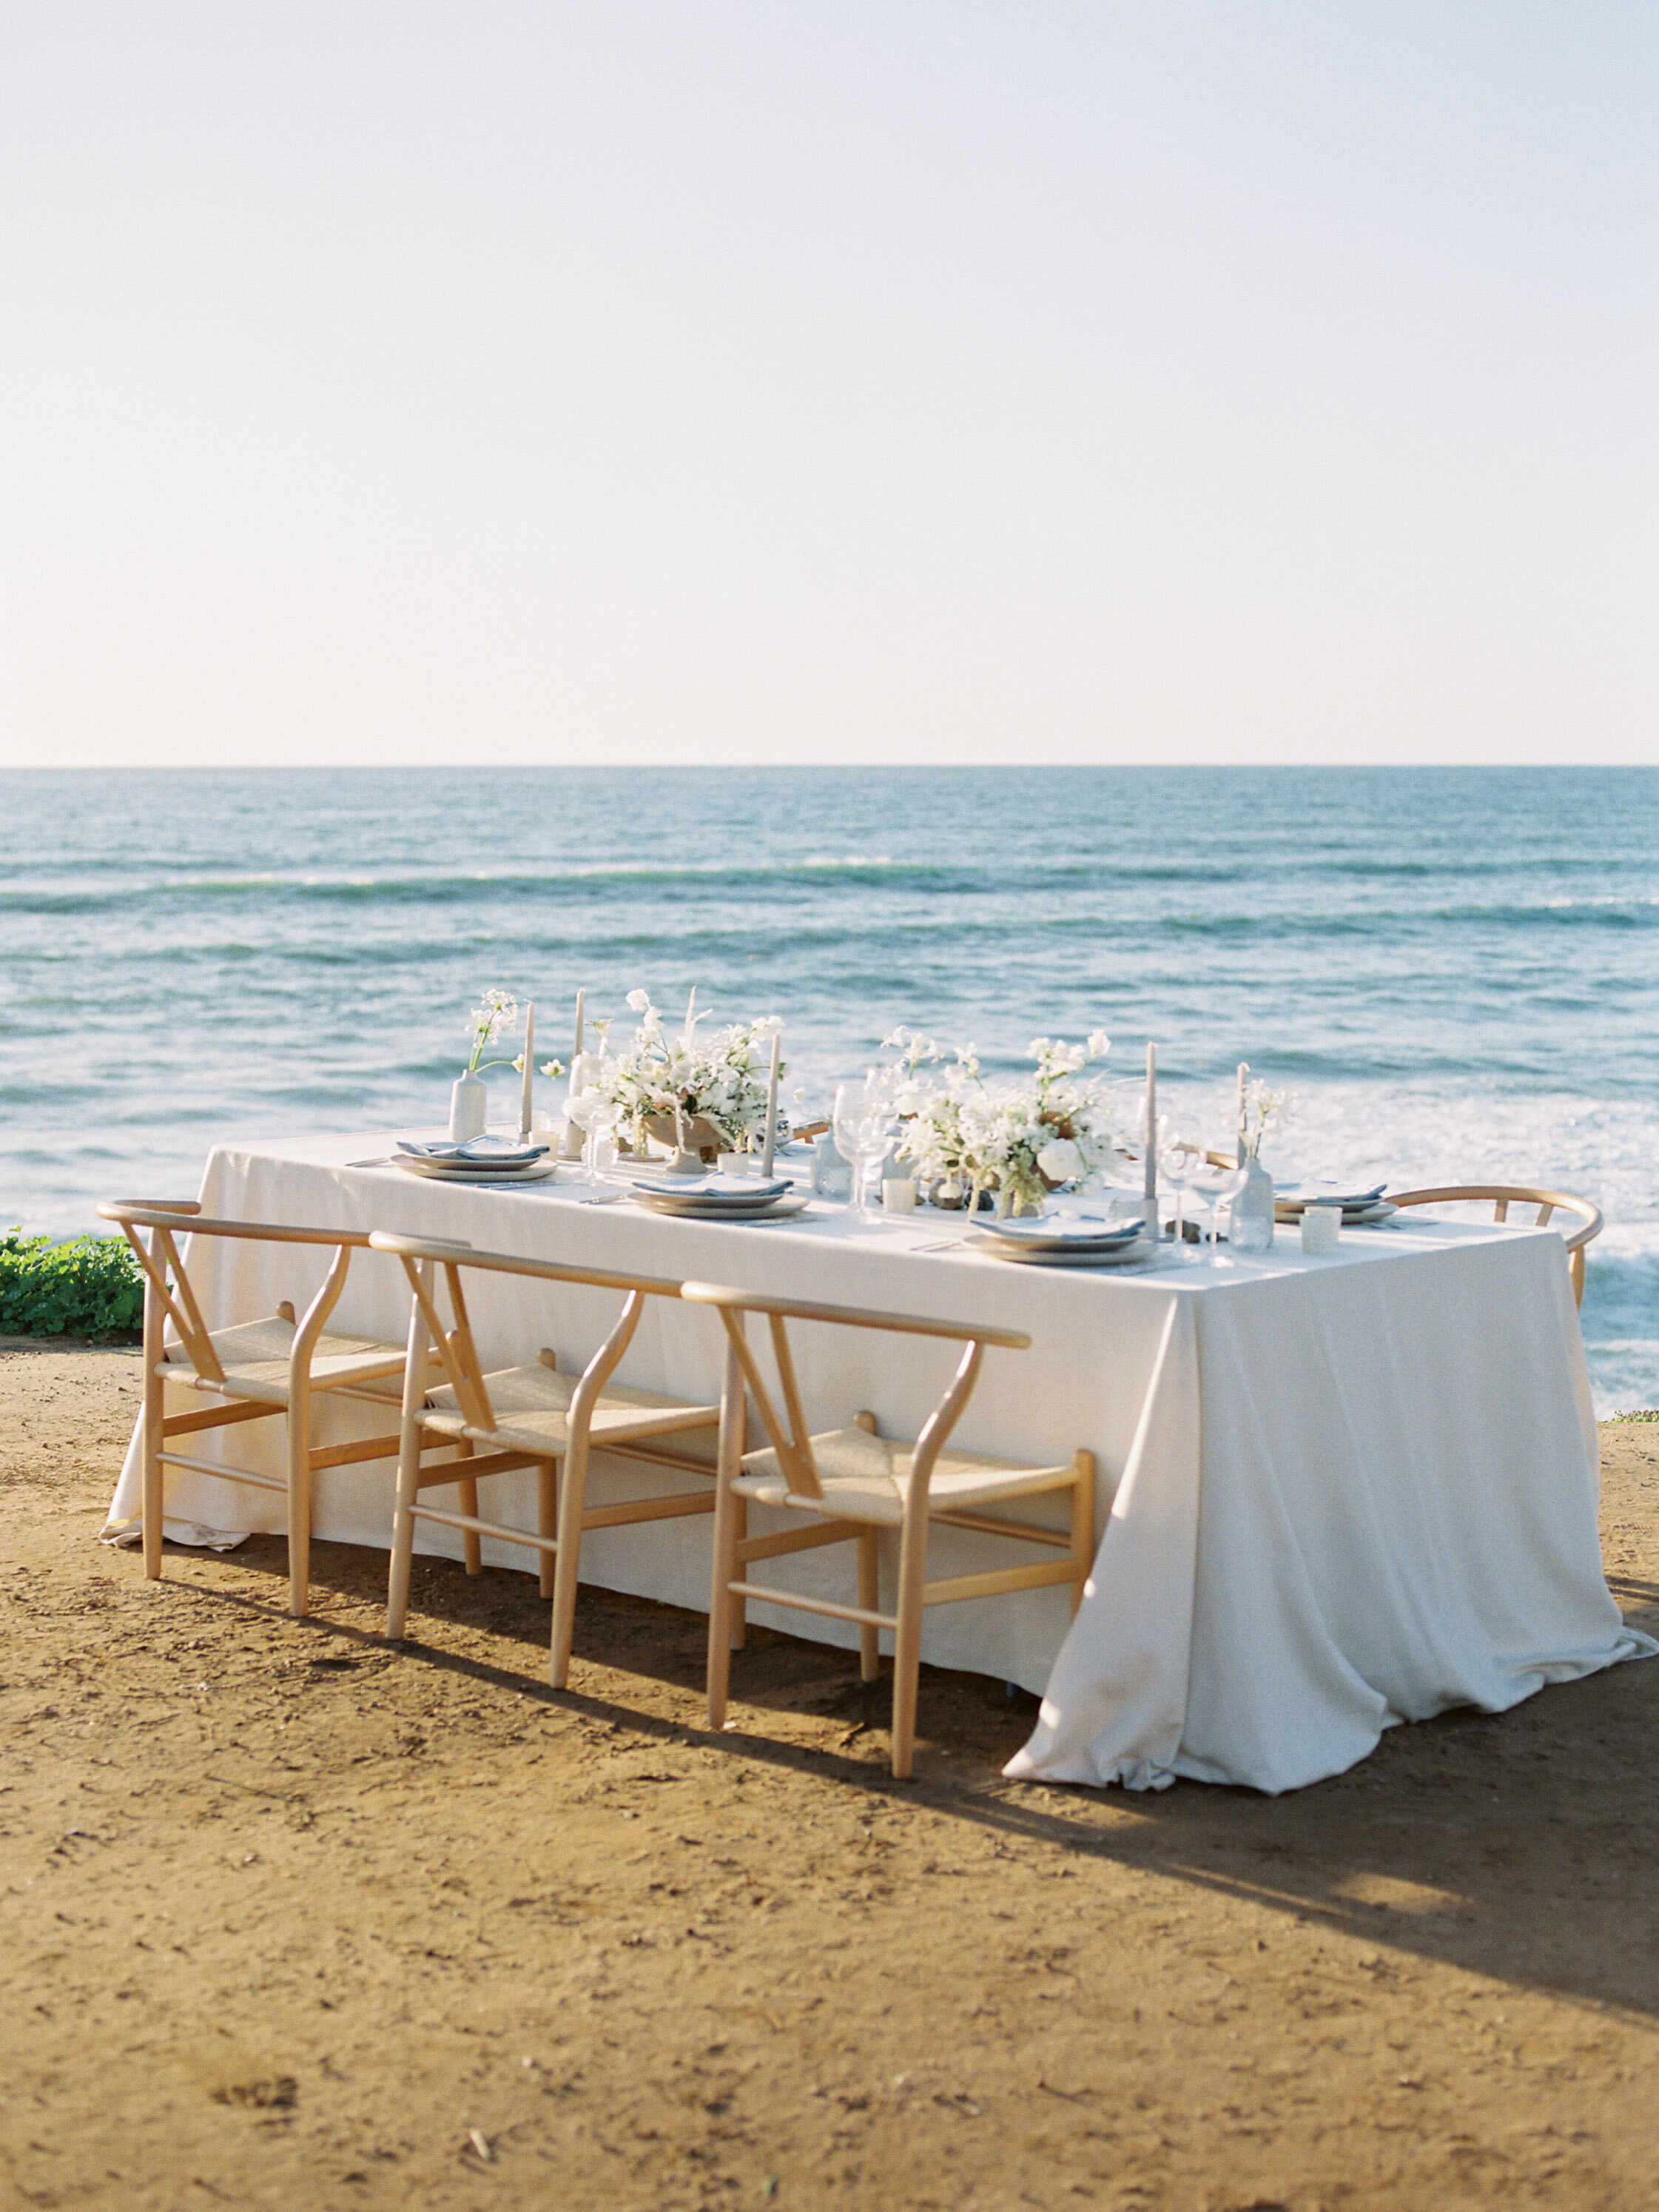 Elegant ocean inspired wedding with blue wedding dress and white tux on film at the Sunset Cliffs in San Diego California by Liz Andolina Photography